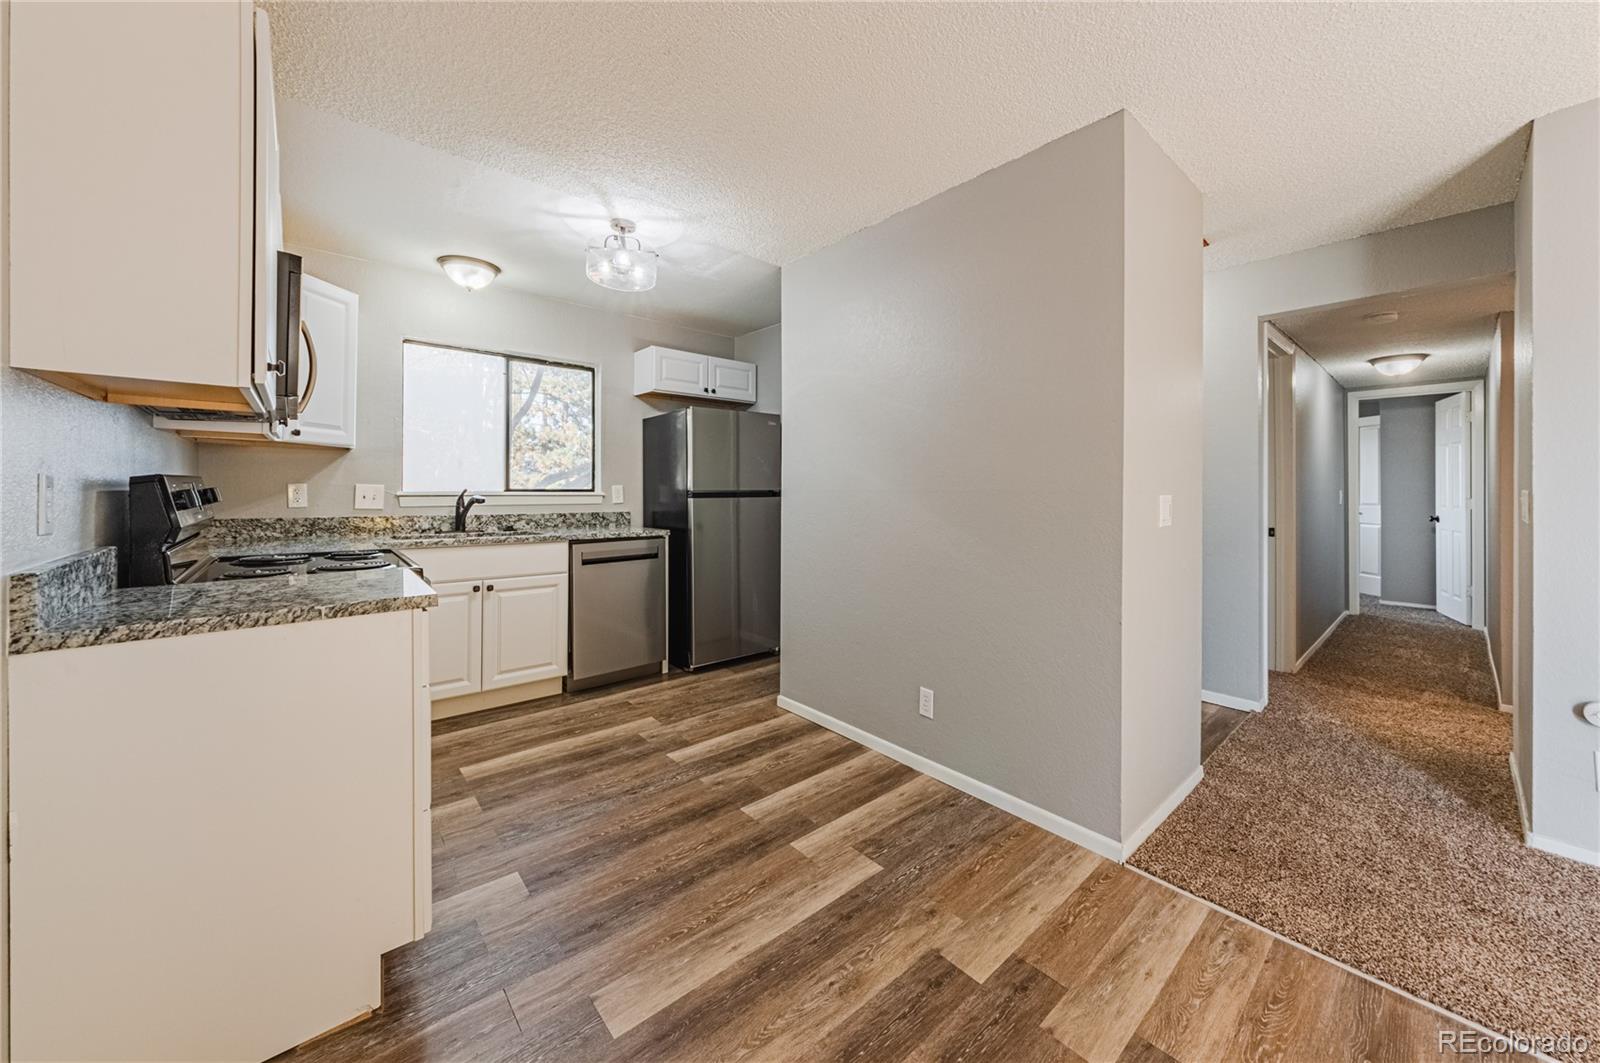 8635 Clay, Westminster, CO